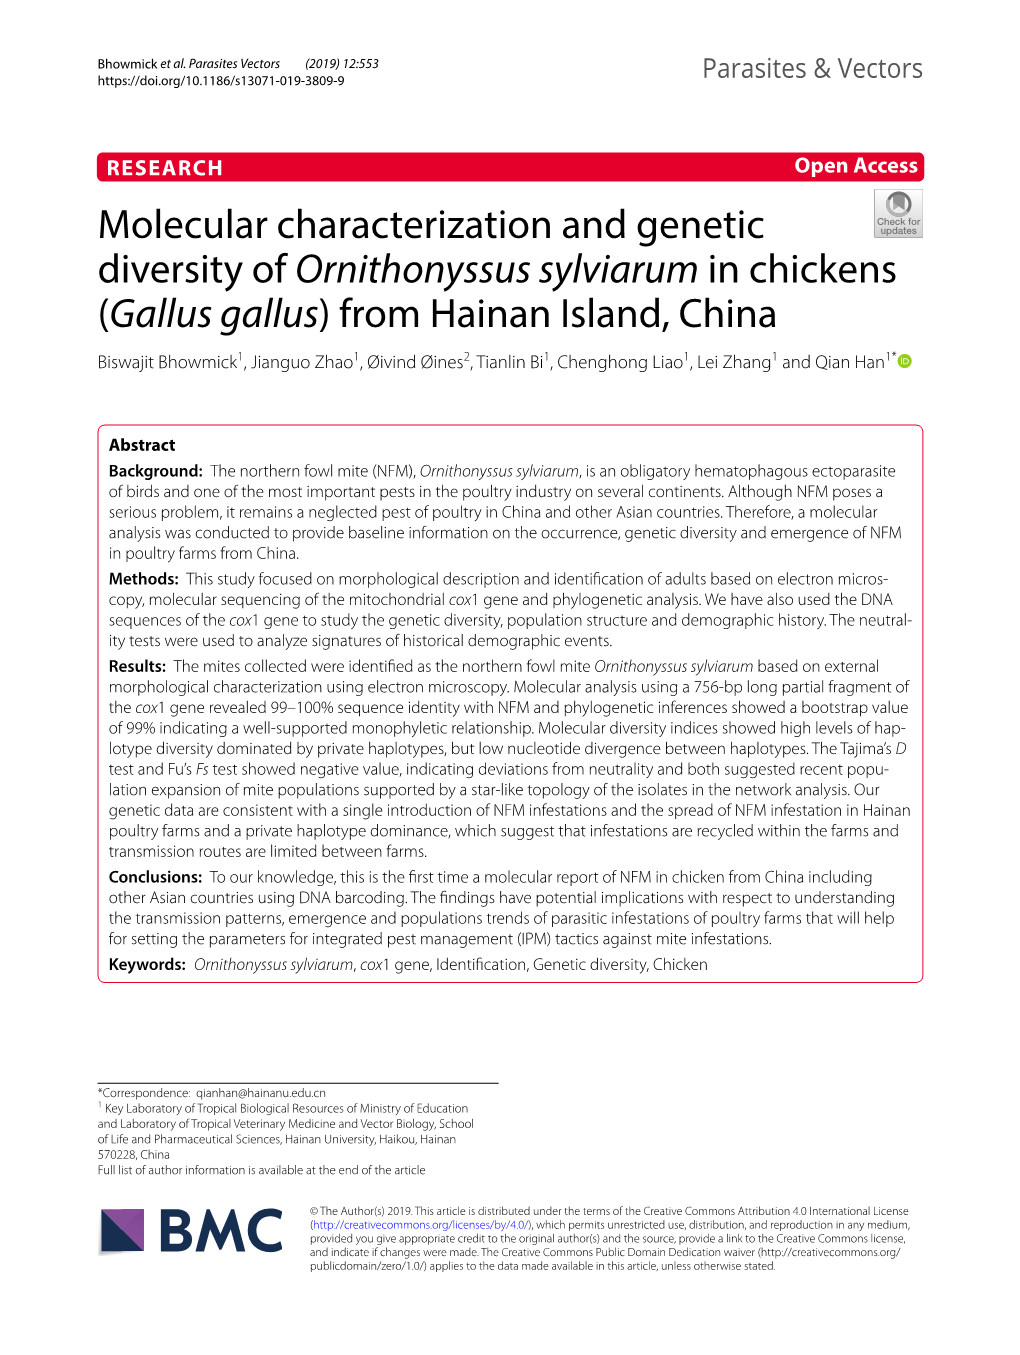 Molecular Characterization and Genetic Diversity of Ornithonyssus